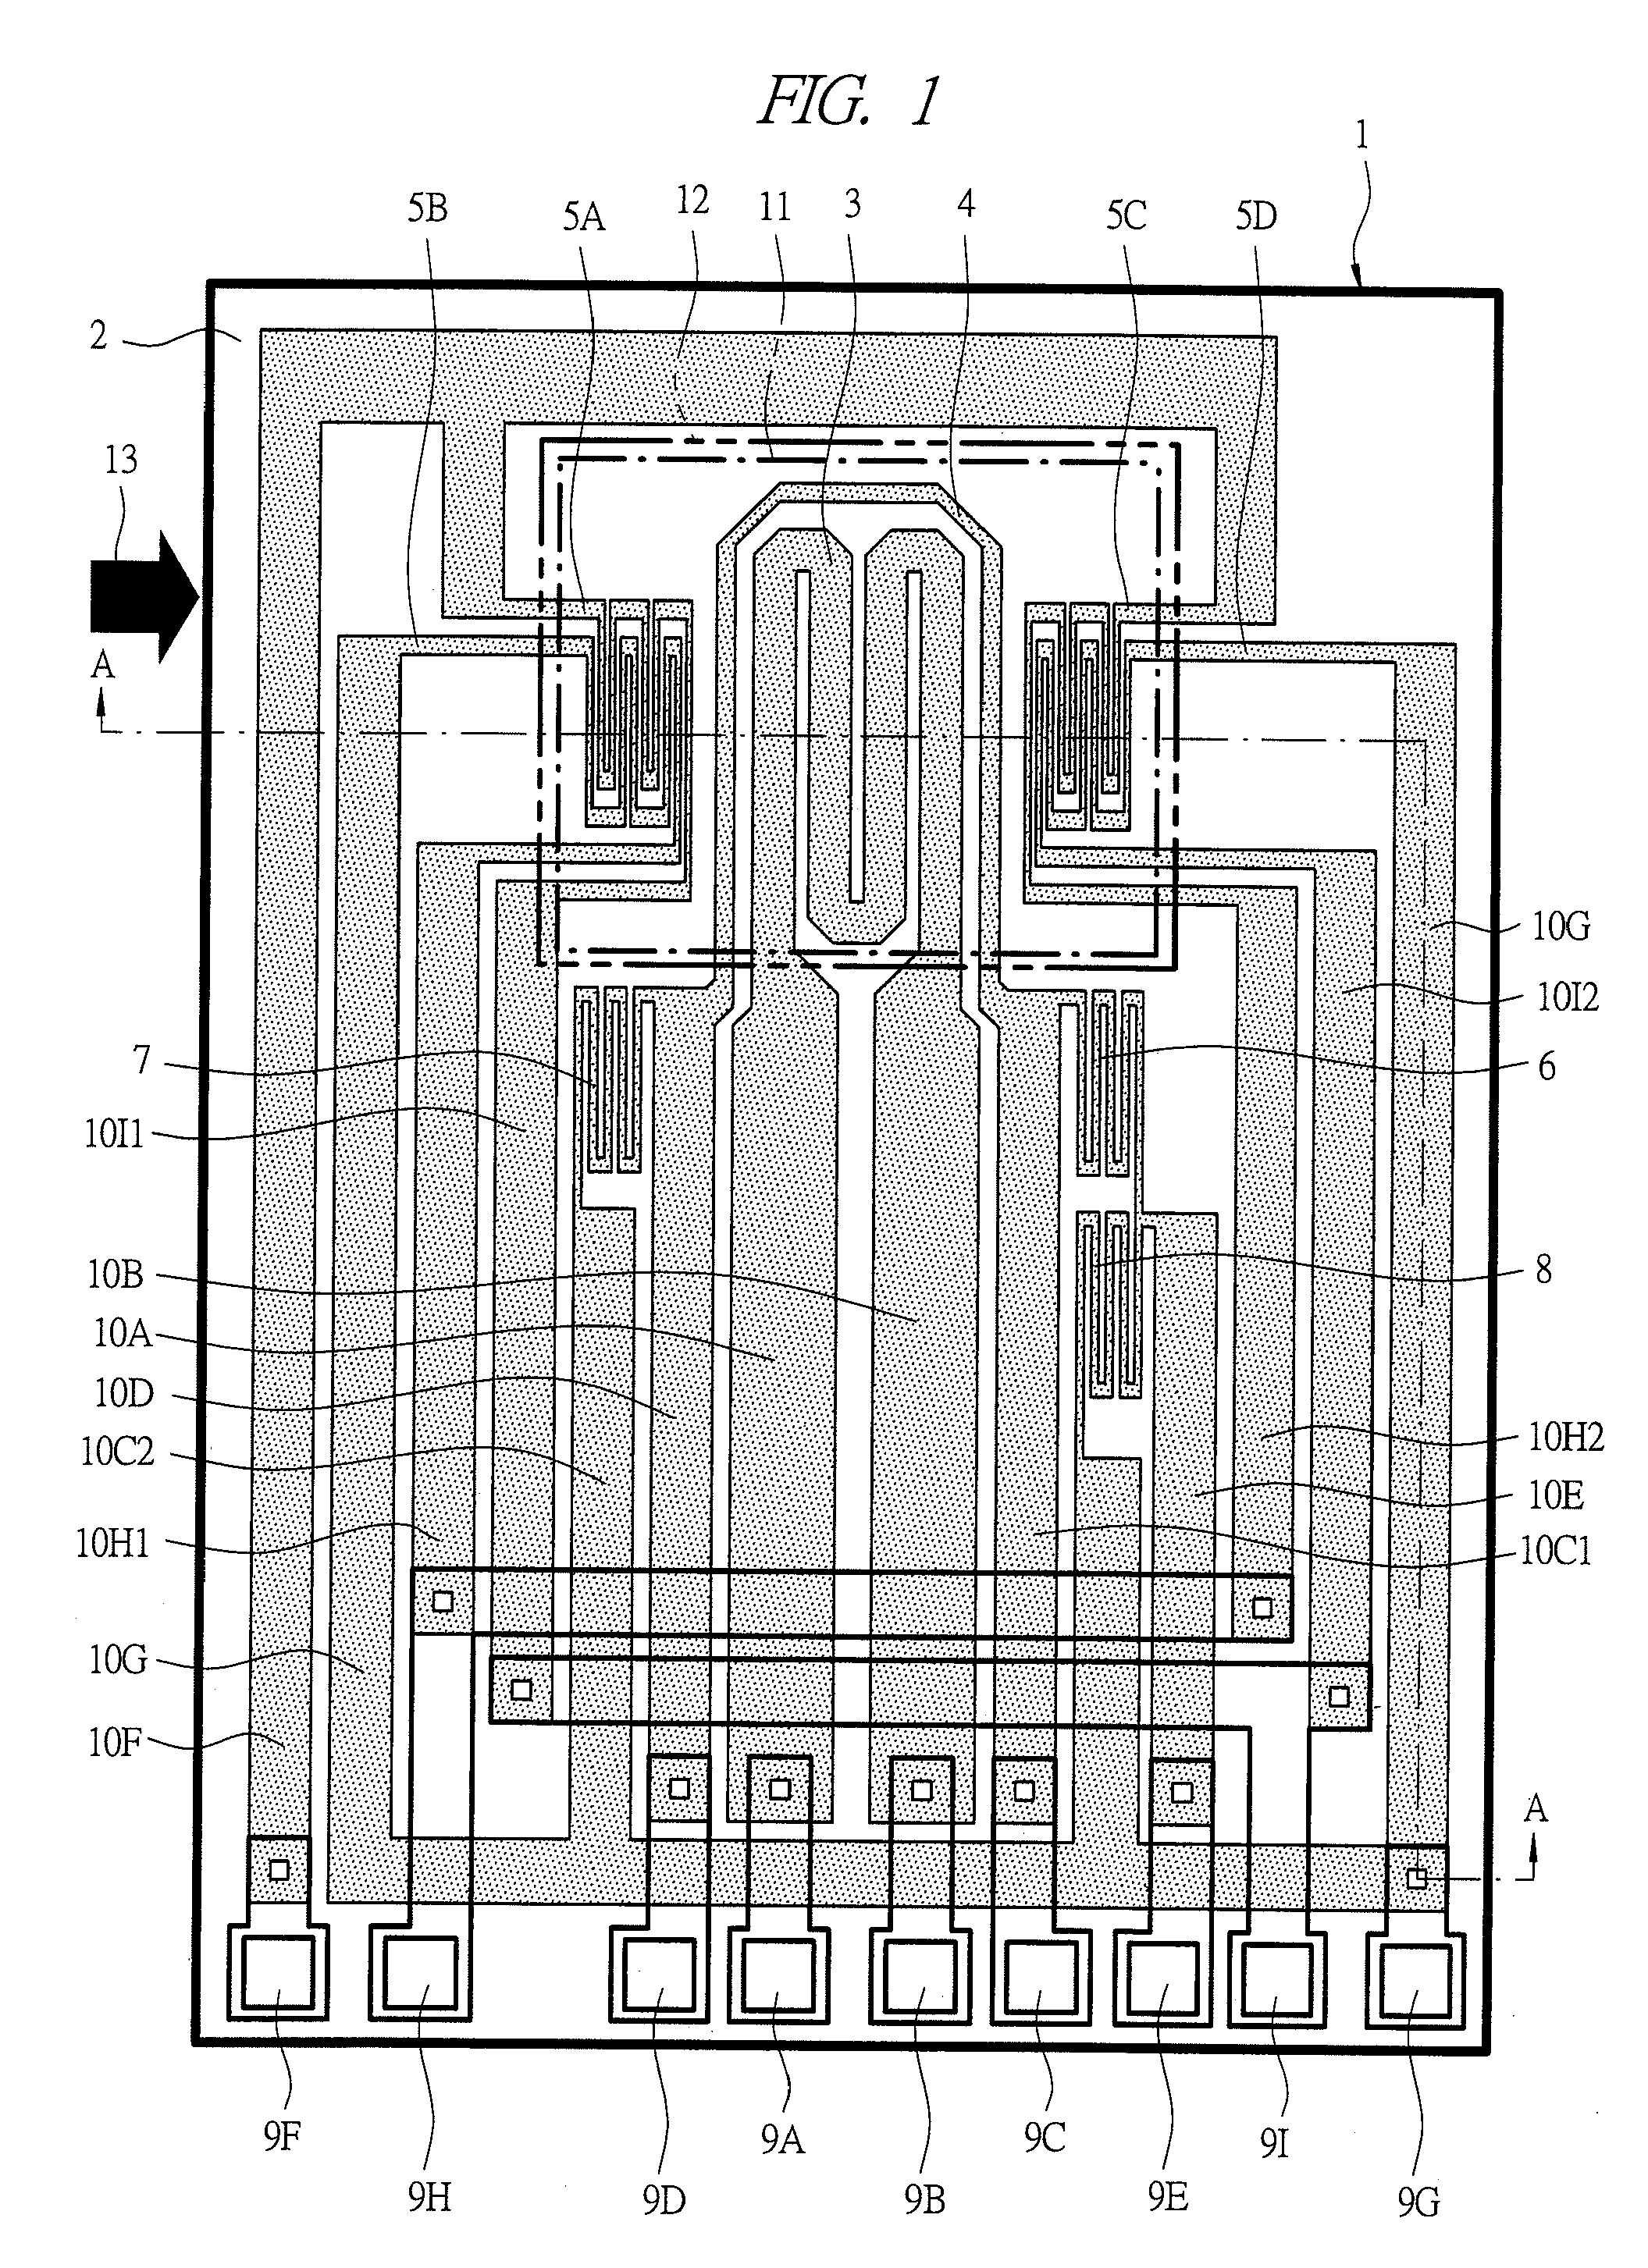 Thermal fluid flow sensor and method of manufacturing the same